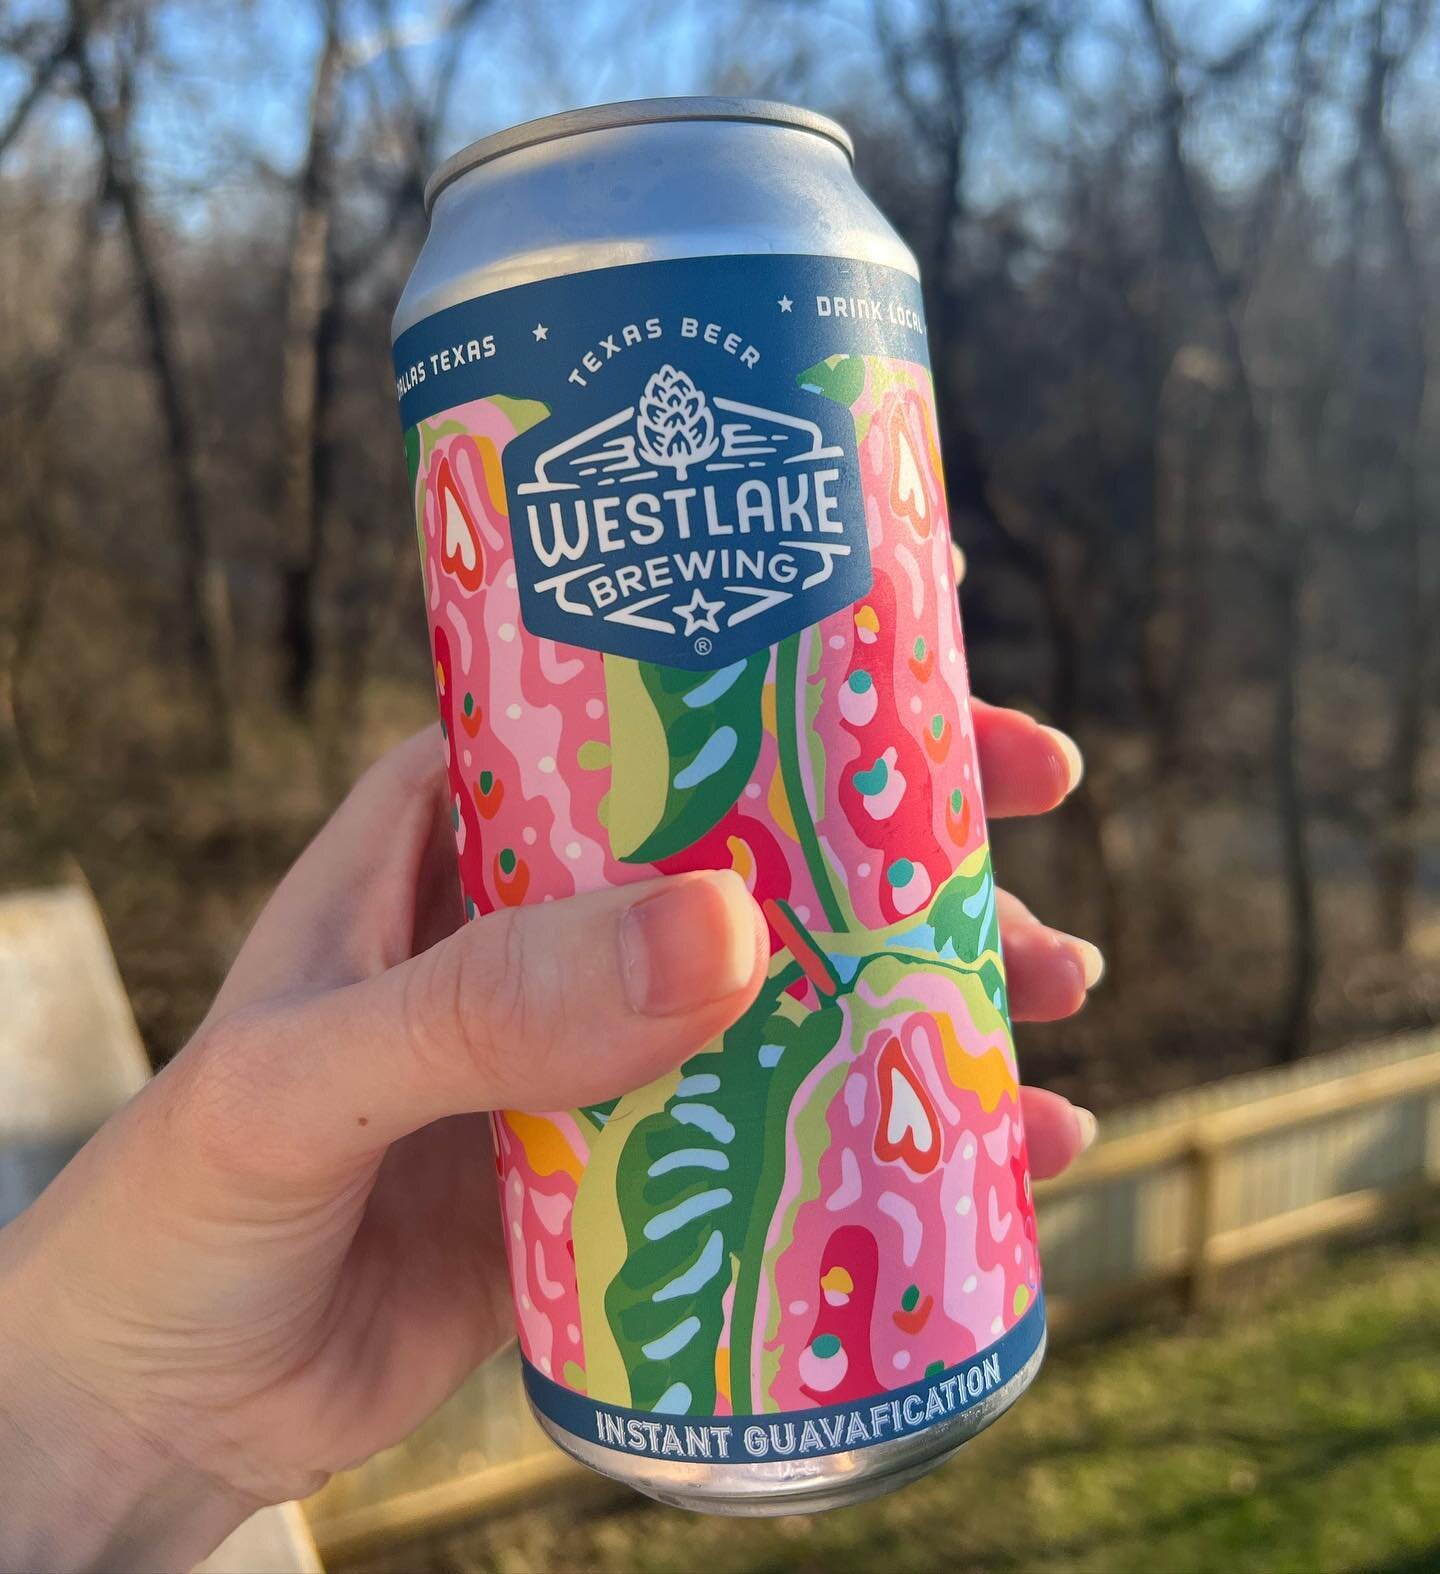 Light, tart, and refreshing with the perfect summer color scheme - we&rsquo;re ready for warmer weather over here and this brew from @westlakebeer has got us in the spirit!